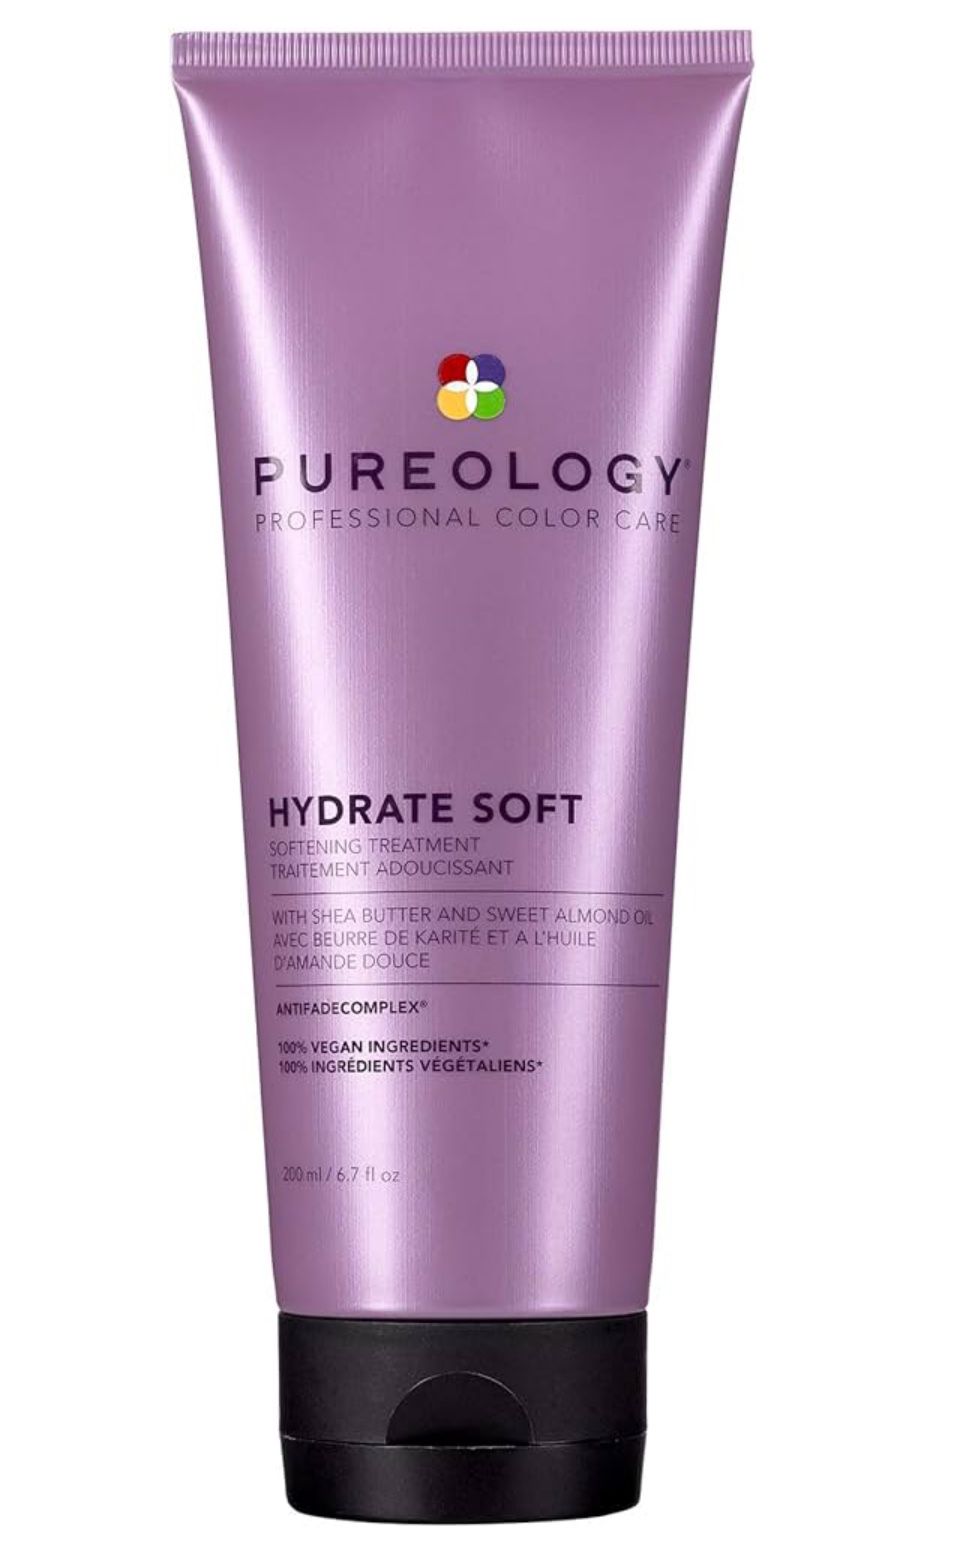 Pureology Hydrate Soft Softening Treatment *NEW*